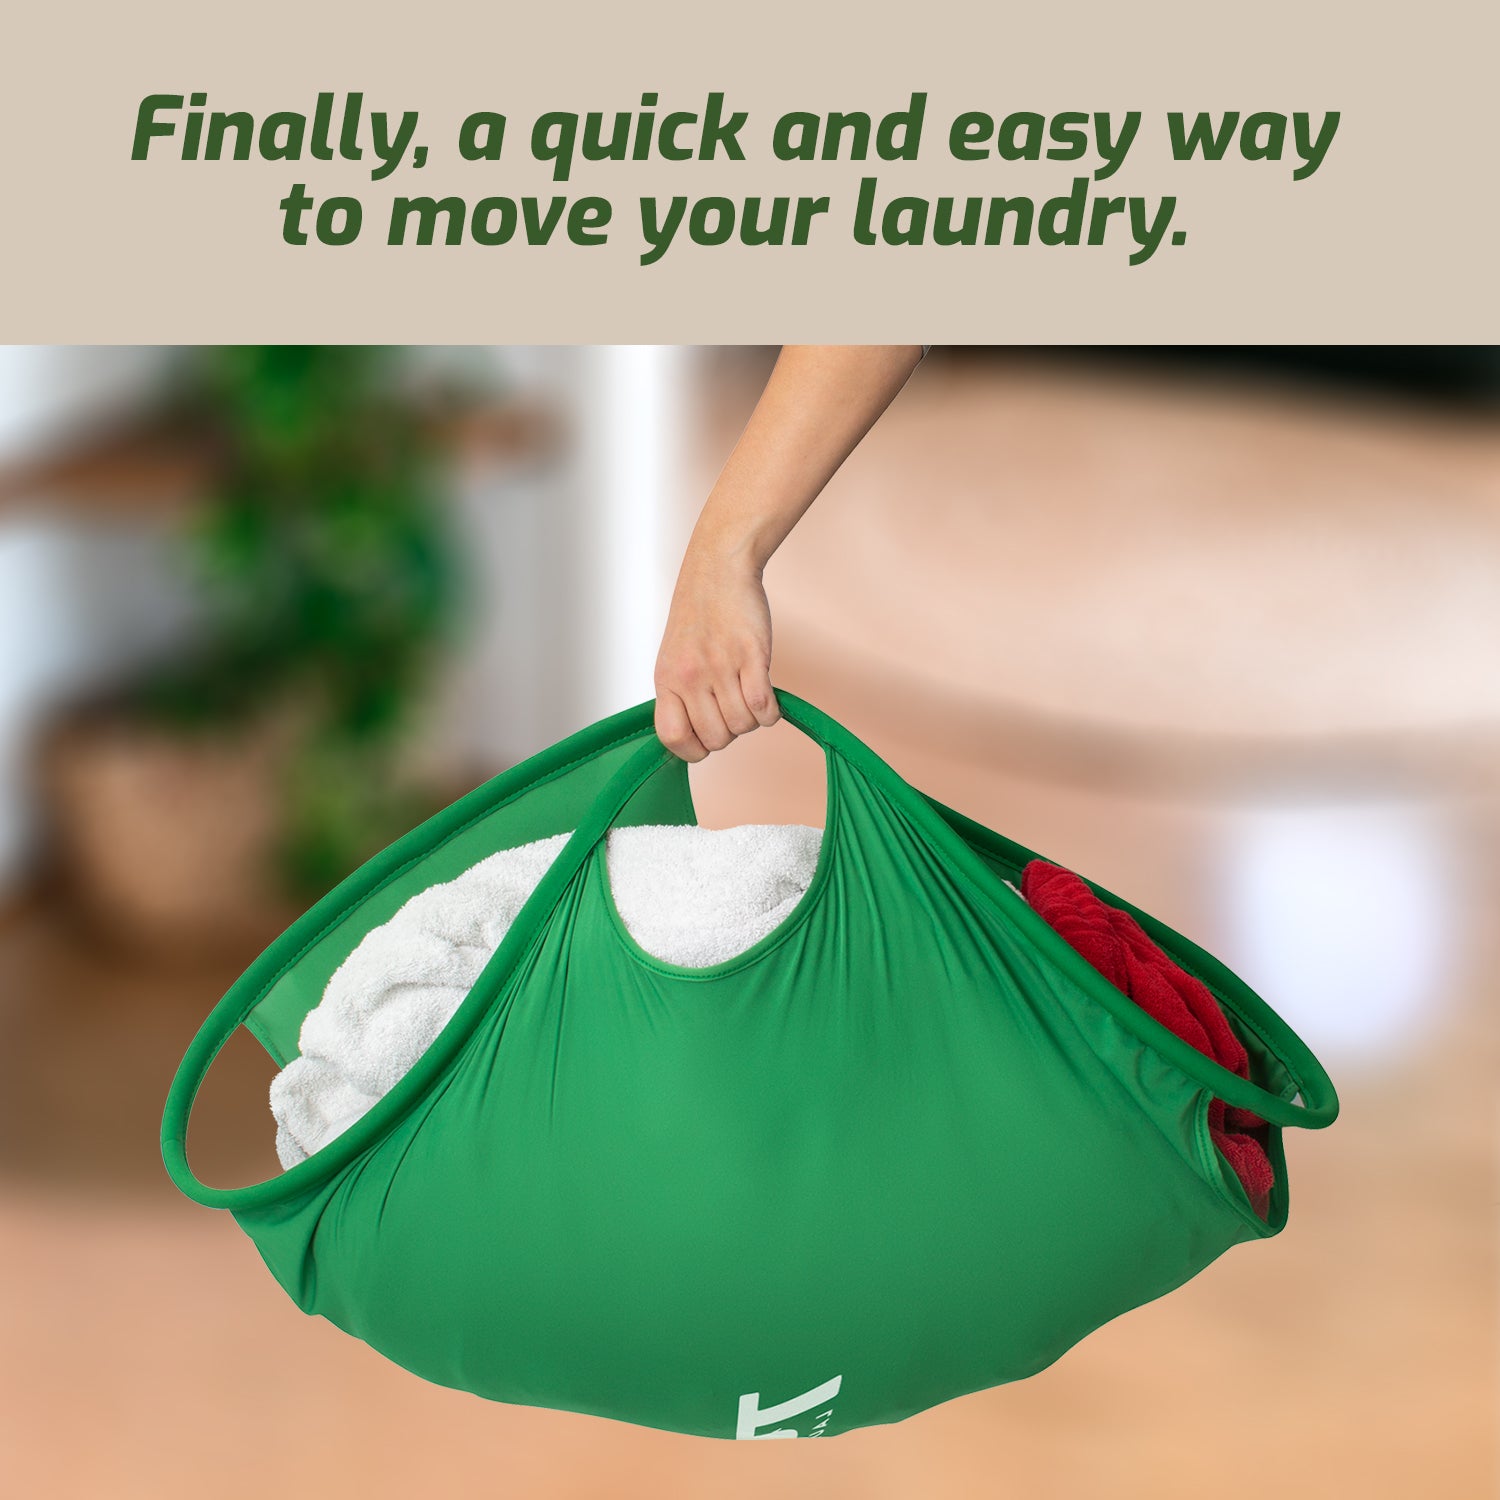 Introducing the practical green folding Laundry Turtle, the ultimate #foldable basket for picking up clothes